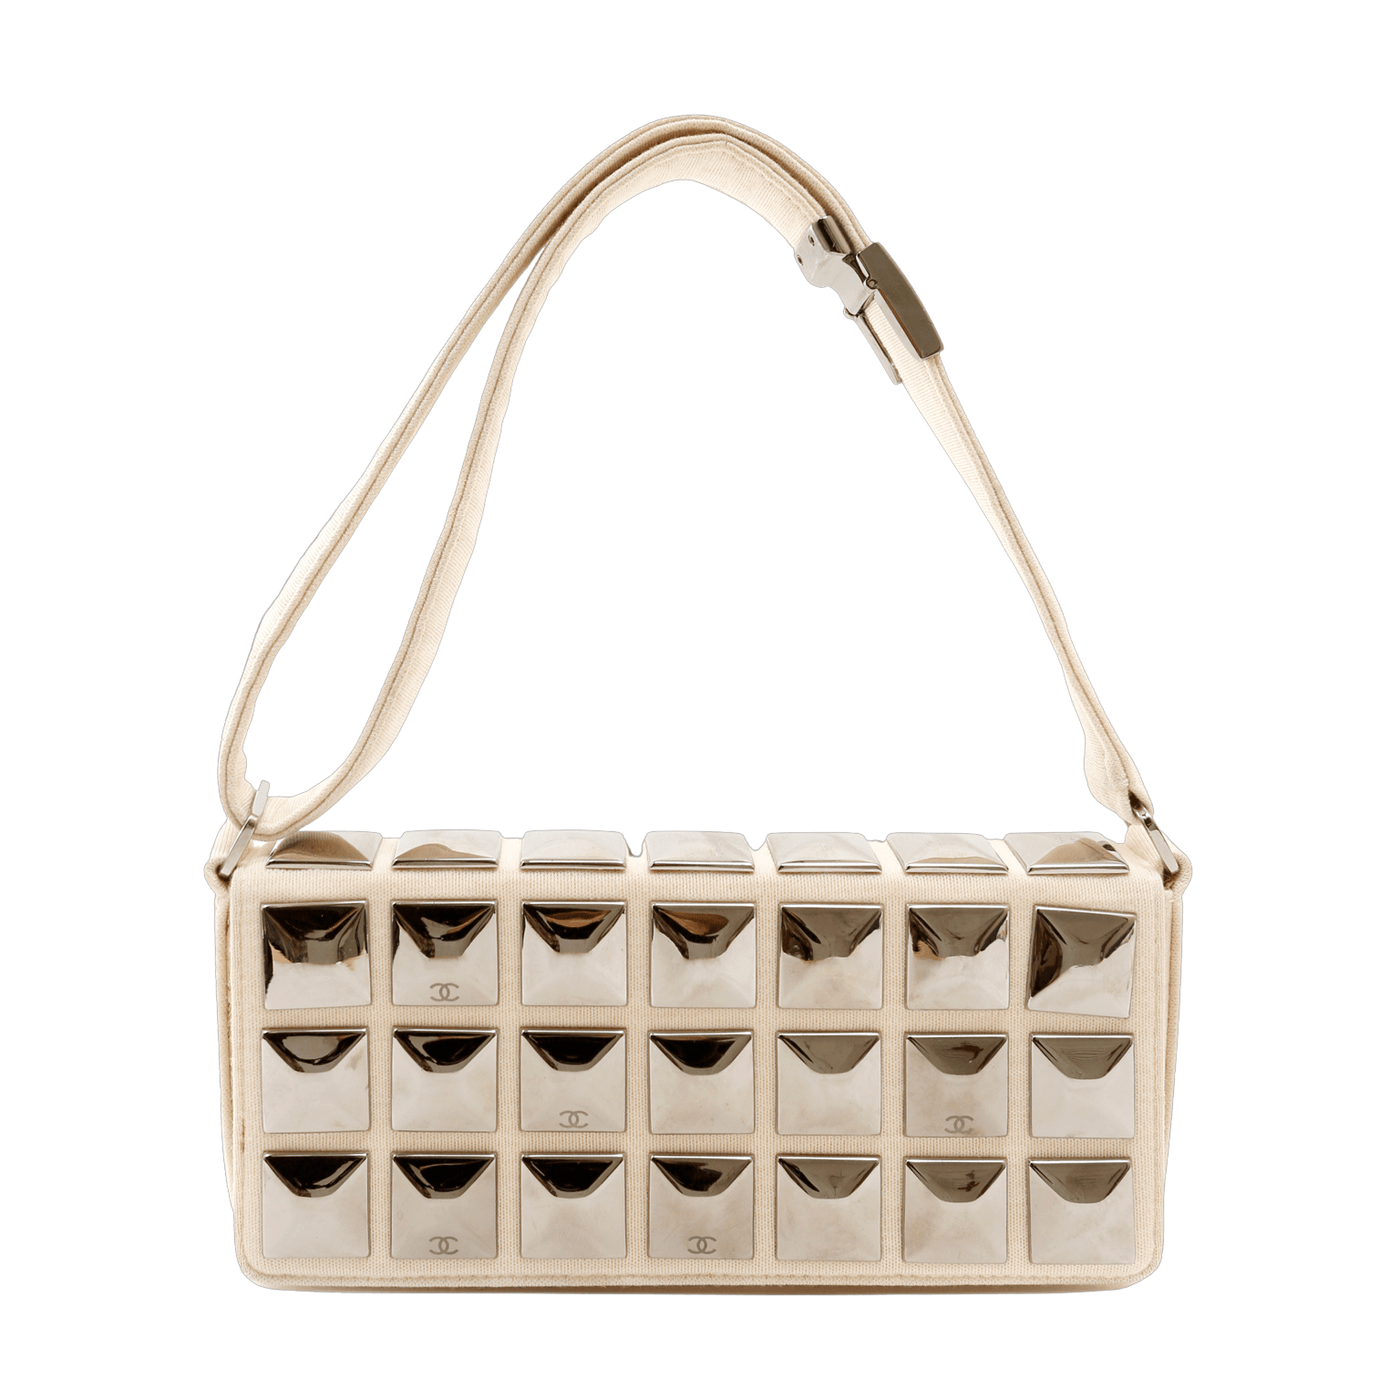 Chanel Ivory Jersey Evening Bag with Mirrored Pyramid Studs - Only Authentics